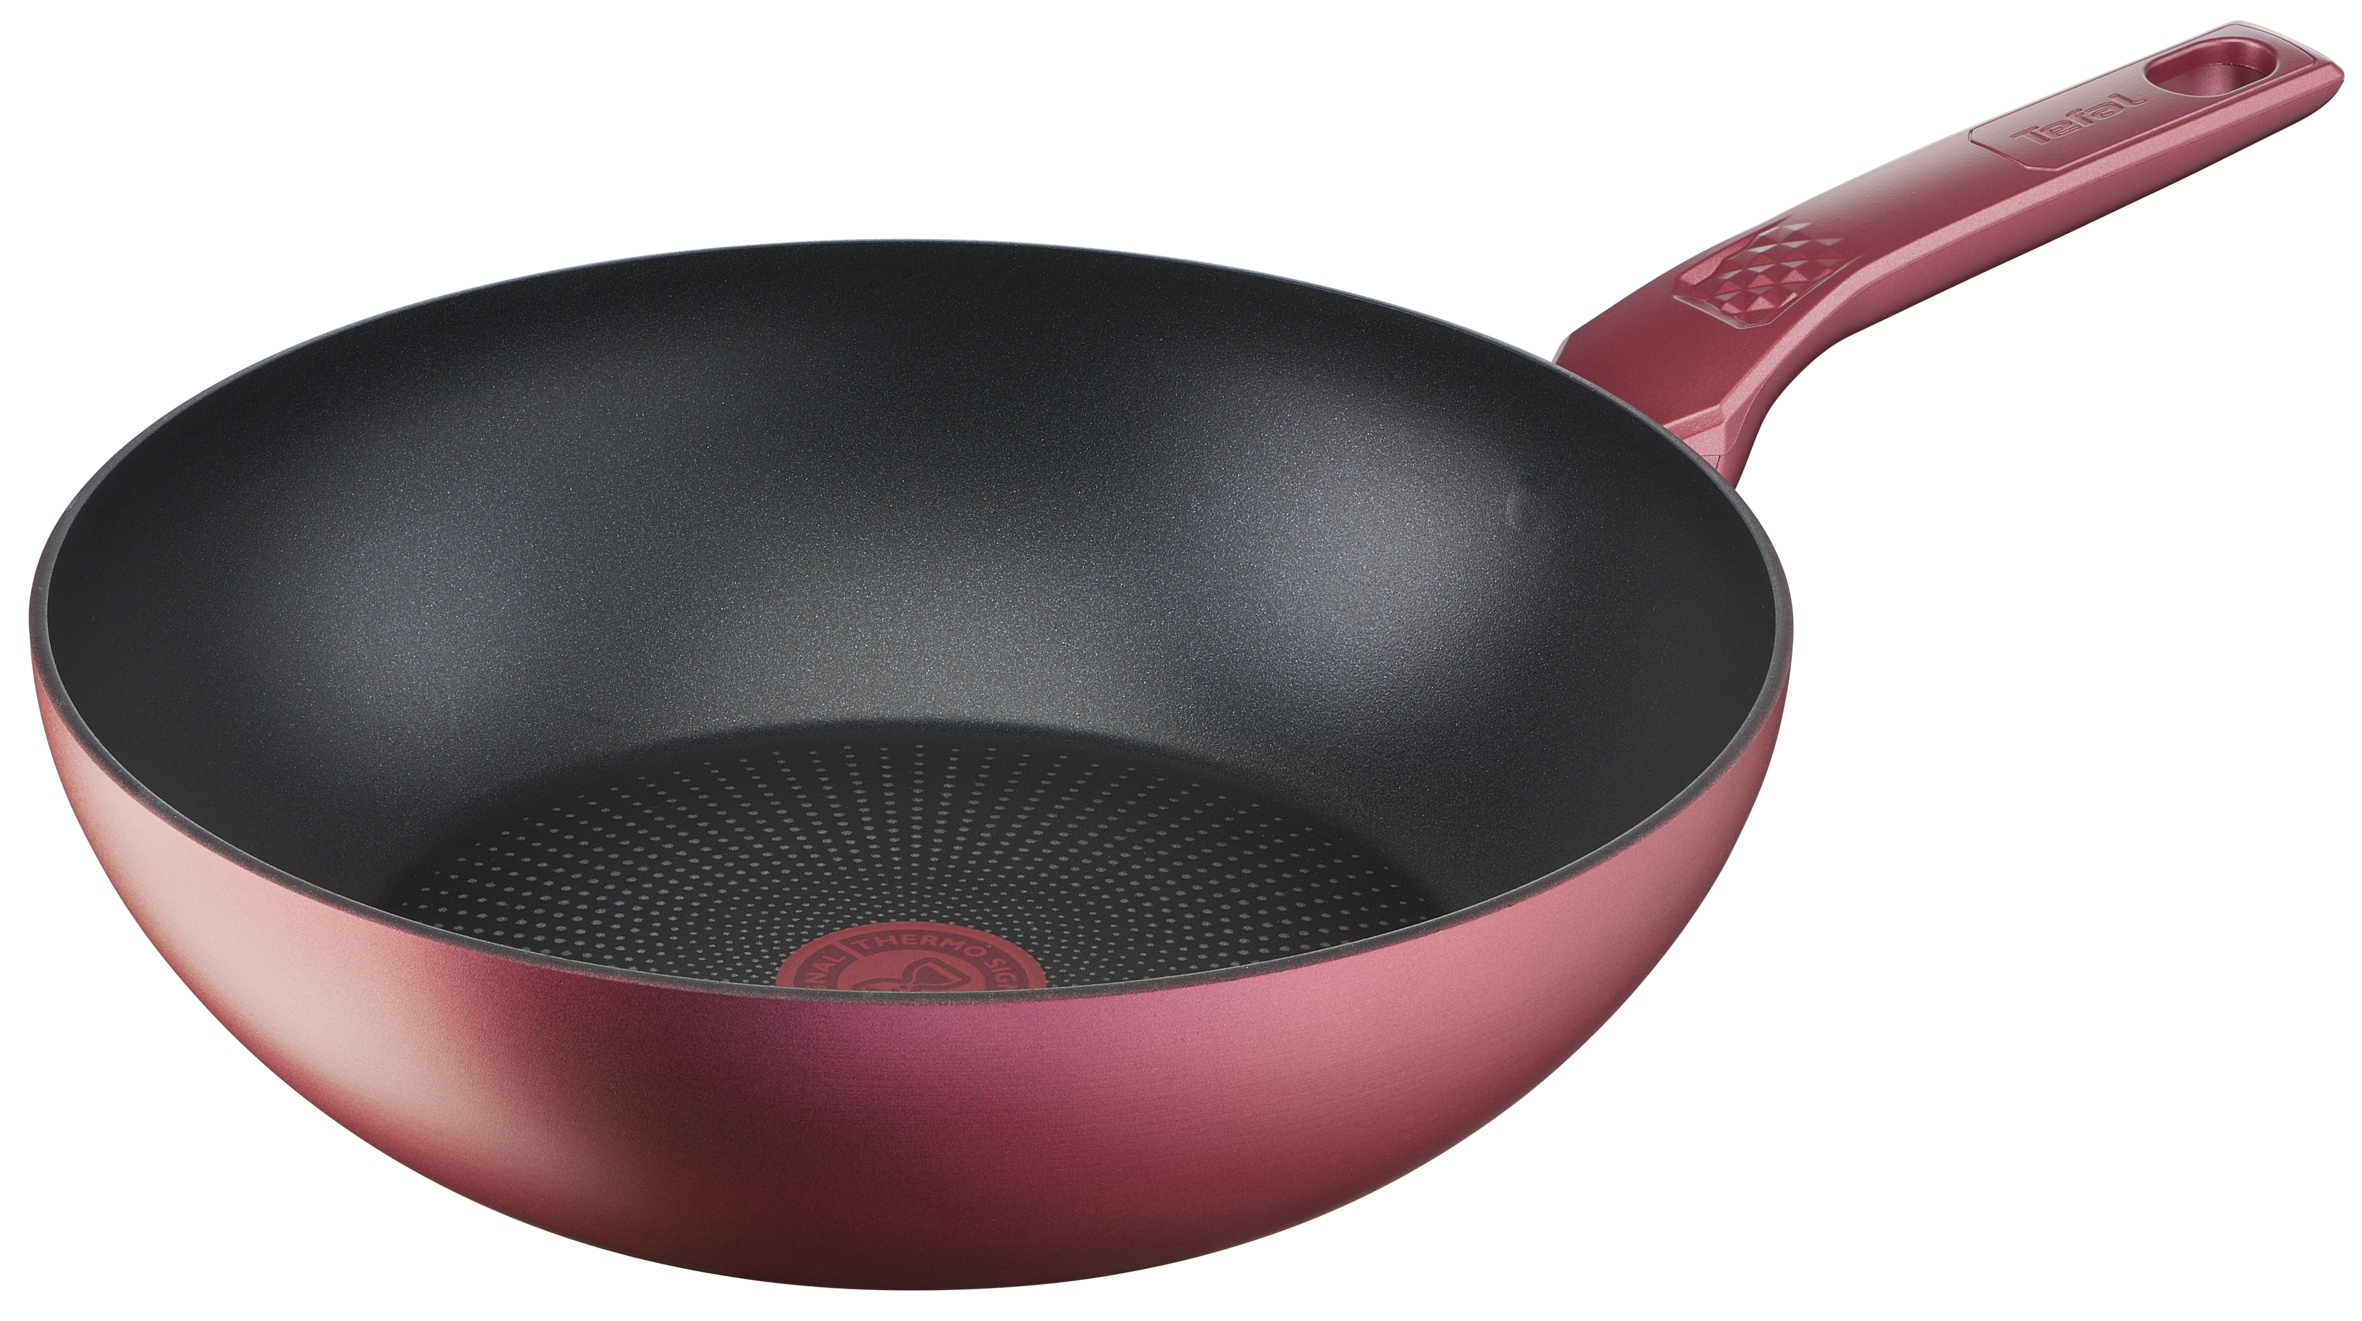 Tefal Daily Chef Red Non-Stick Induction Wok 28cm